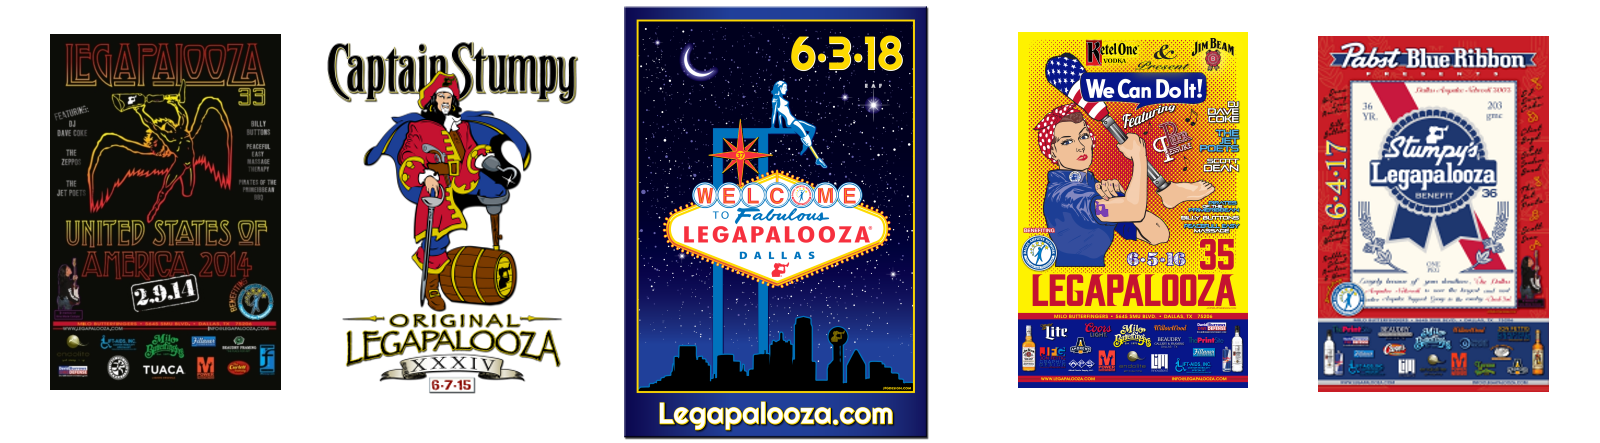 M-Power Gearing Up for Legapalooza 2018